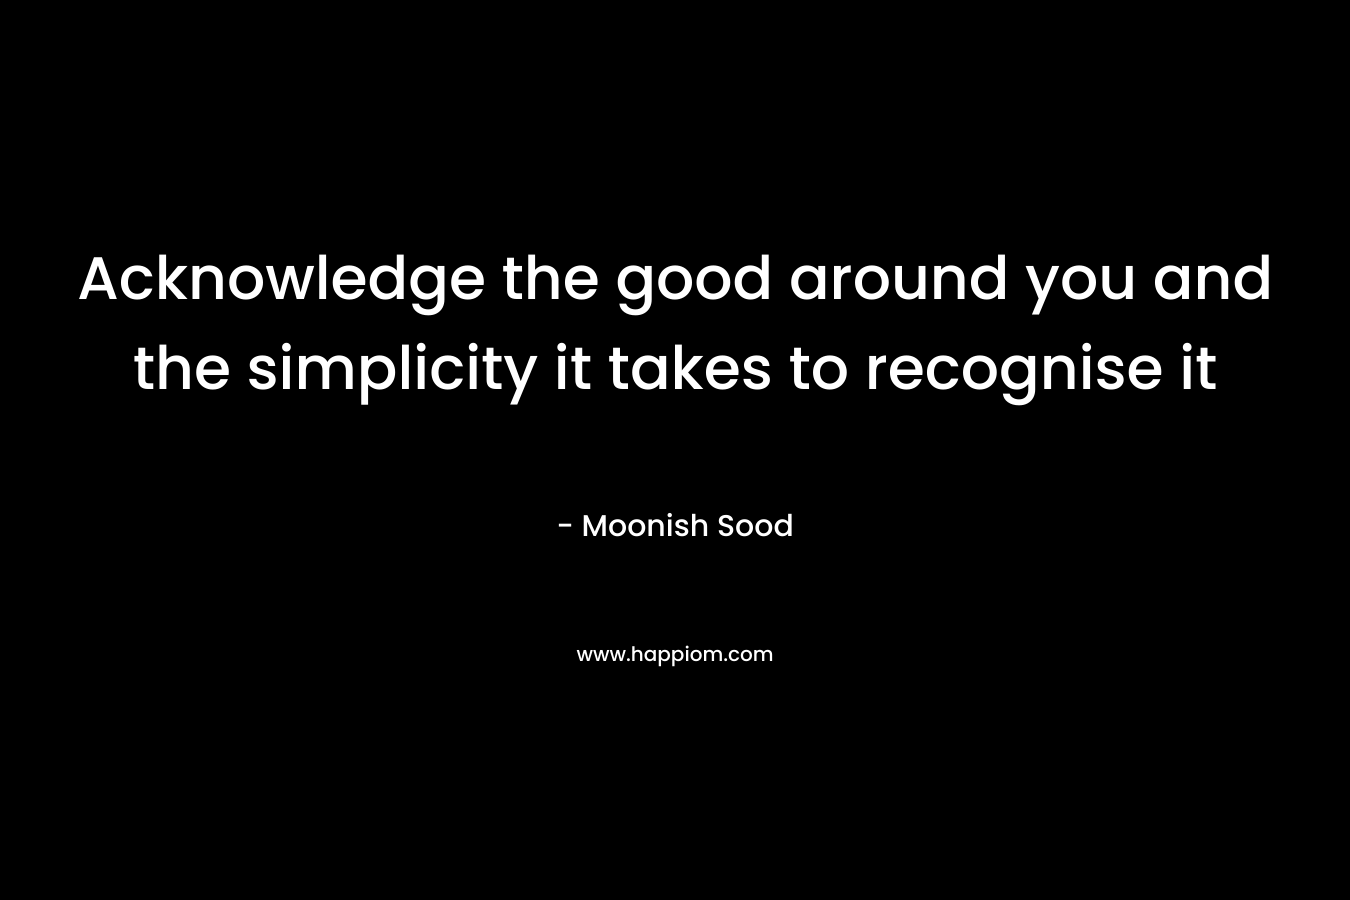 Acknowledge the good around you and the simplicity it takes to recognise it – Moonish Sood